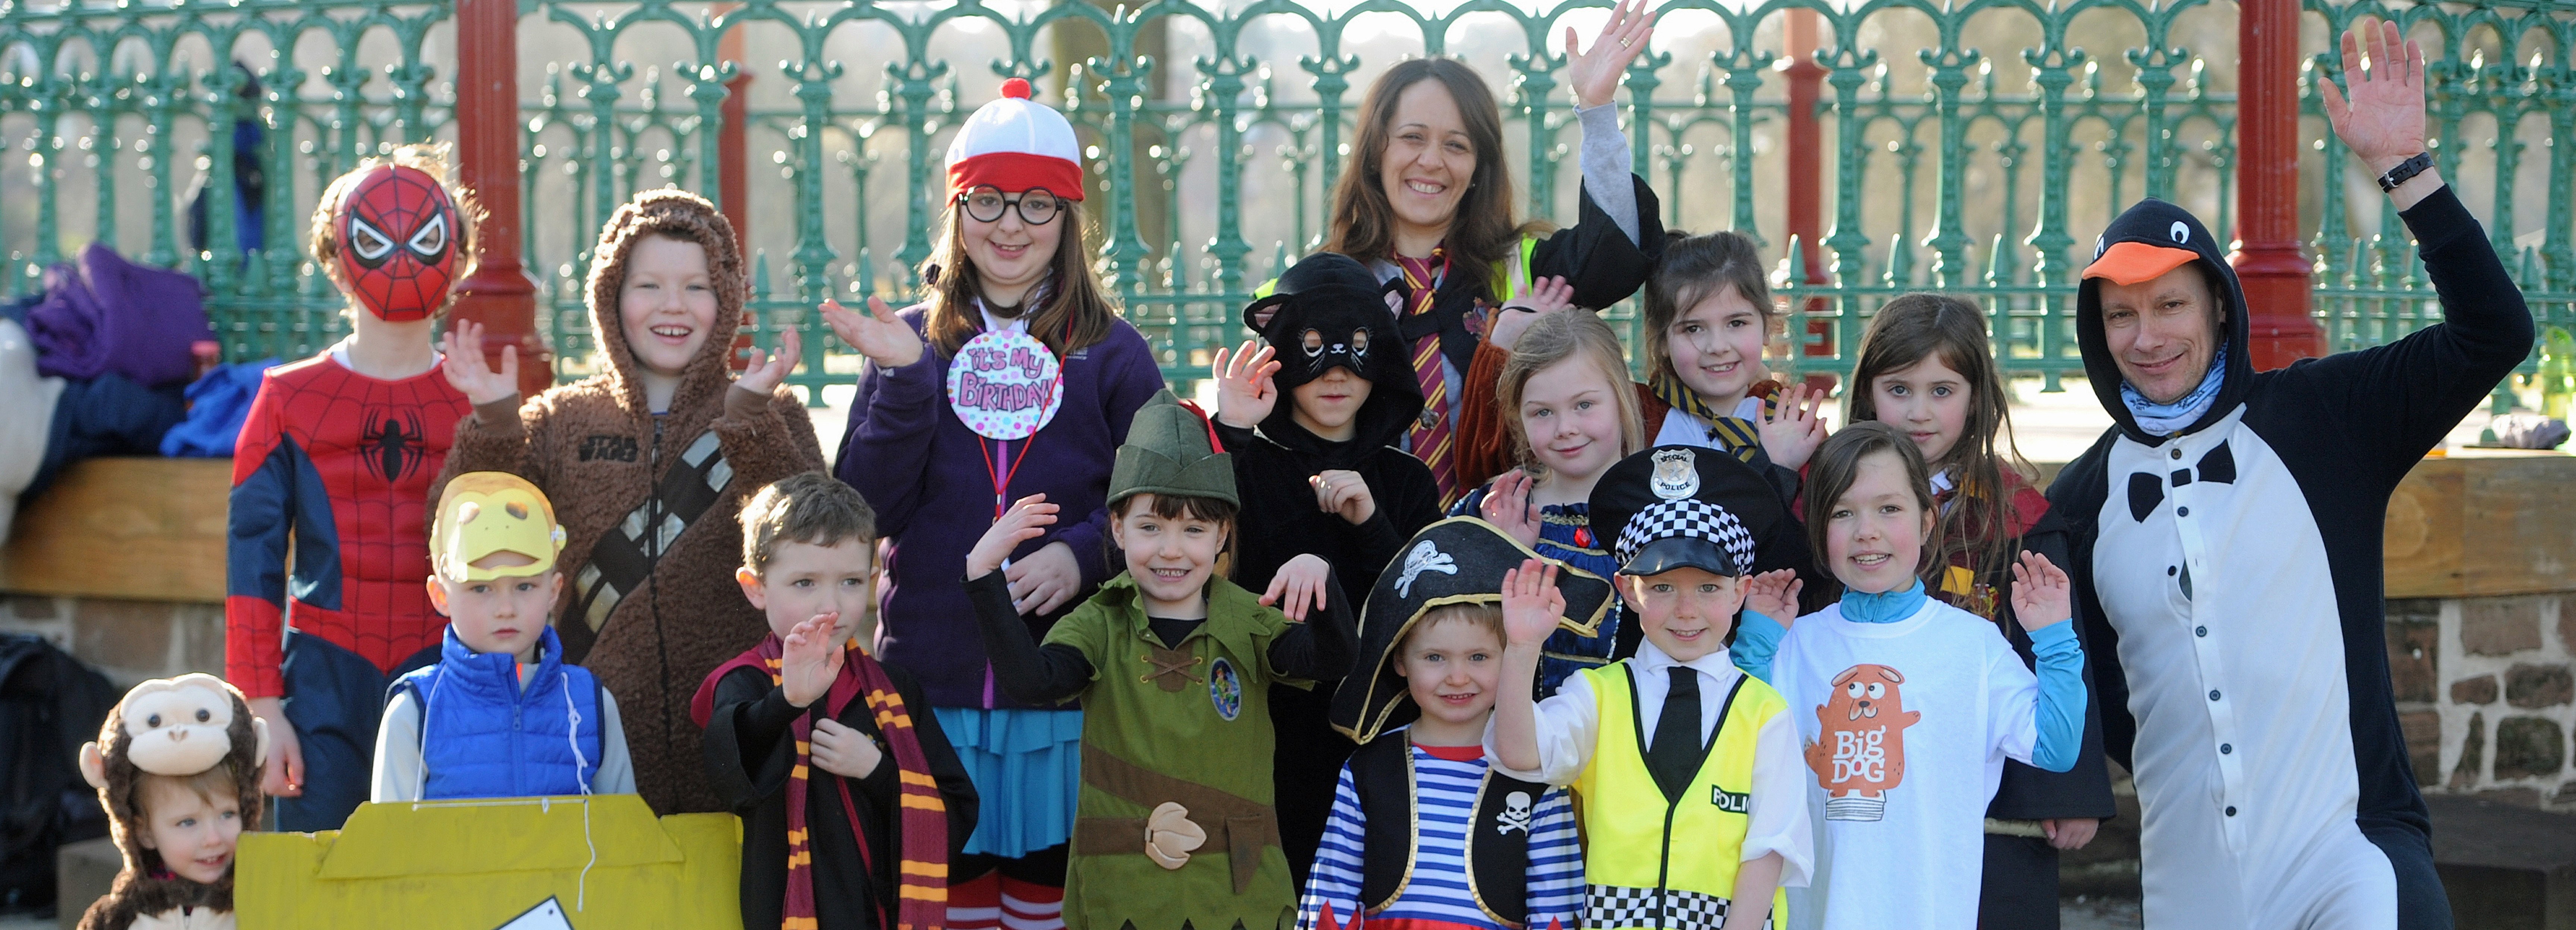 A group of children dressed up as various book characters stand waving and smiling at a Children's Book Festival event. Green railings are behind them.